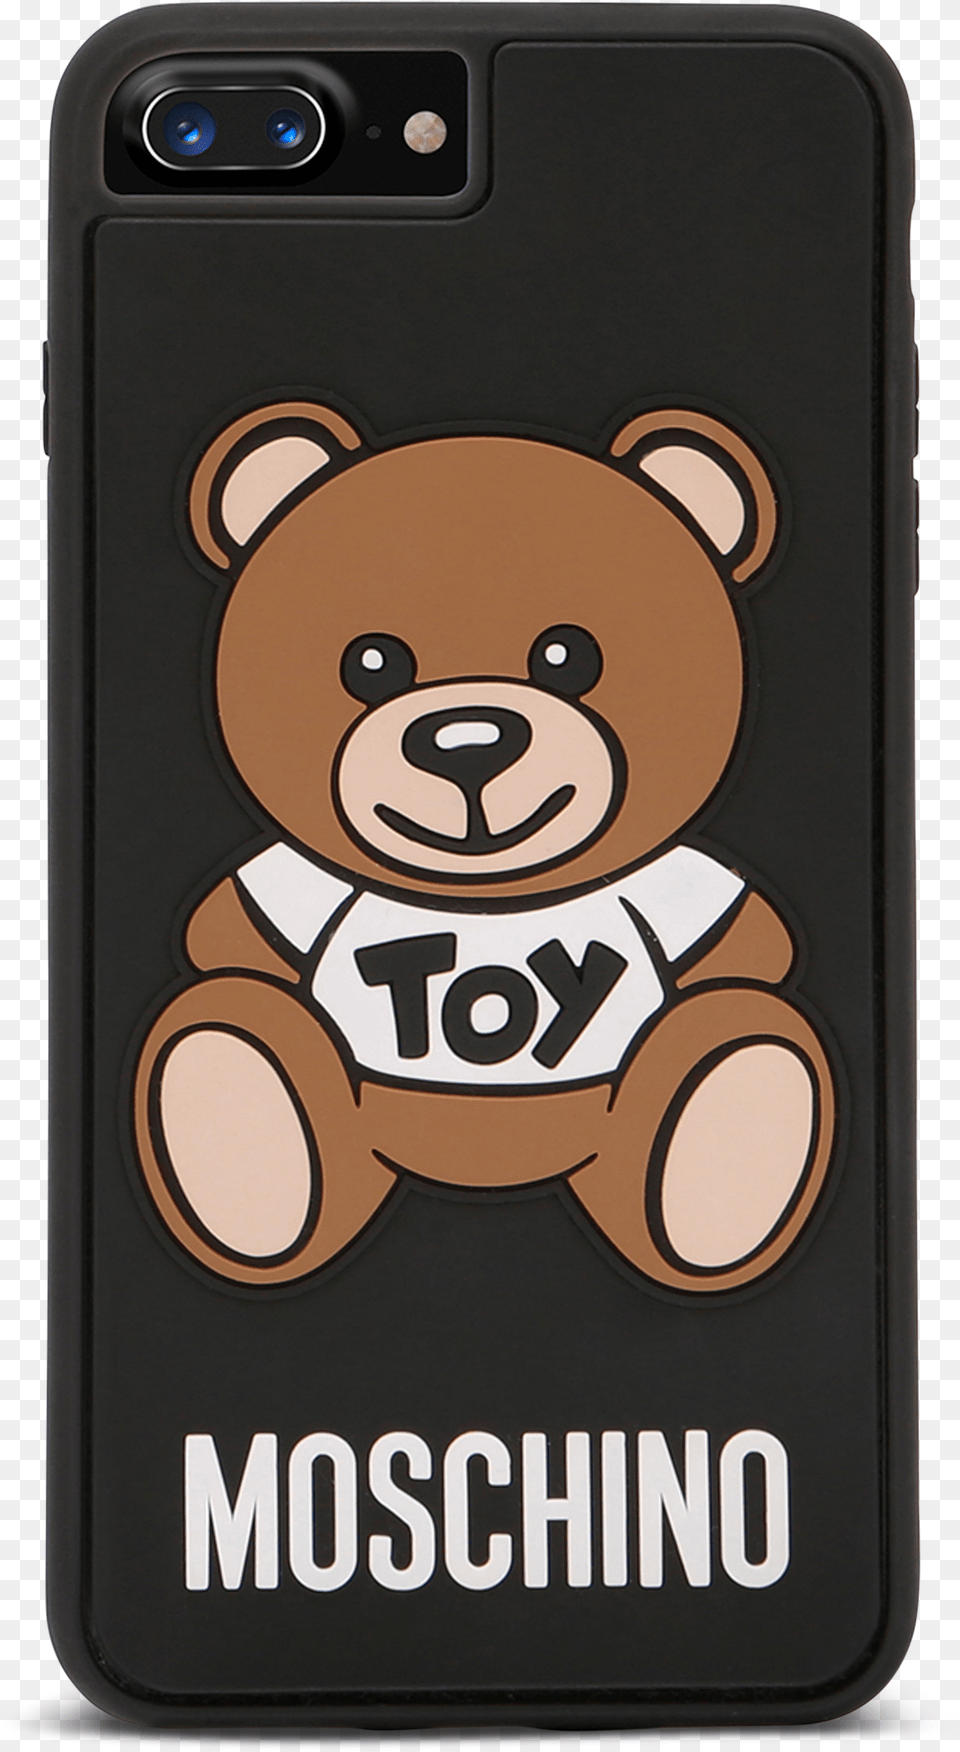 Iphone 8 Plus Cover With Moschinoteddy Bear Application Moschino Teddy Bear Case Iphone, Electronics, Mobile Phone, Phone Free Transparent Png